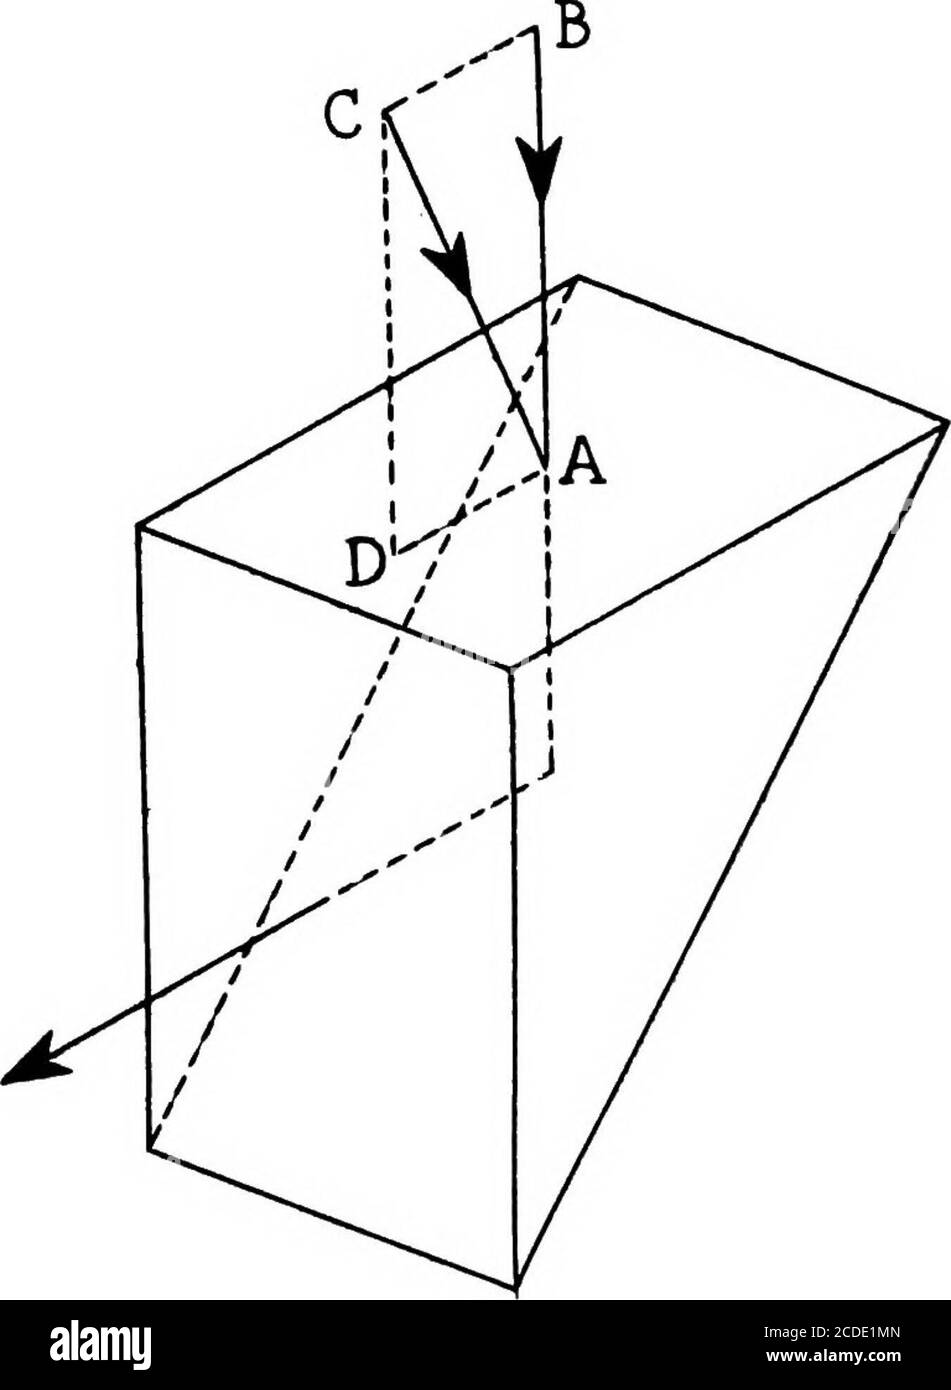 . Problems in physics. Derived from military situations and experience . Figure 7. Porro Prism PRISMS 50. If the reflection of a printed page is viewed in a mirror, the letters are observed to be reversed. This is commonlyspoken of as perversion of the image. Is the image per-verted after a single reflection in a prism? 51. Is it perverted after two reflection? 52. Is the image perverted after an odd number of reflections? 53. Is the image perverted after an even number? 54. Is the real image formed by a lens perverted? 55. Is a virtual image formed by a lens perverted? 56. Does any combinatio Stock Photo